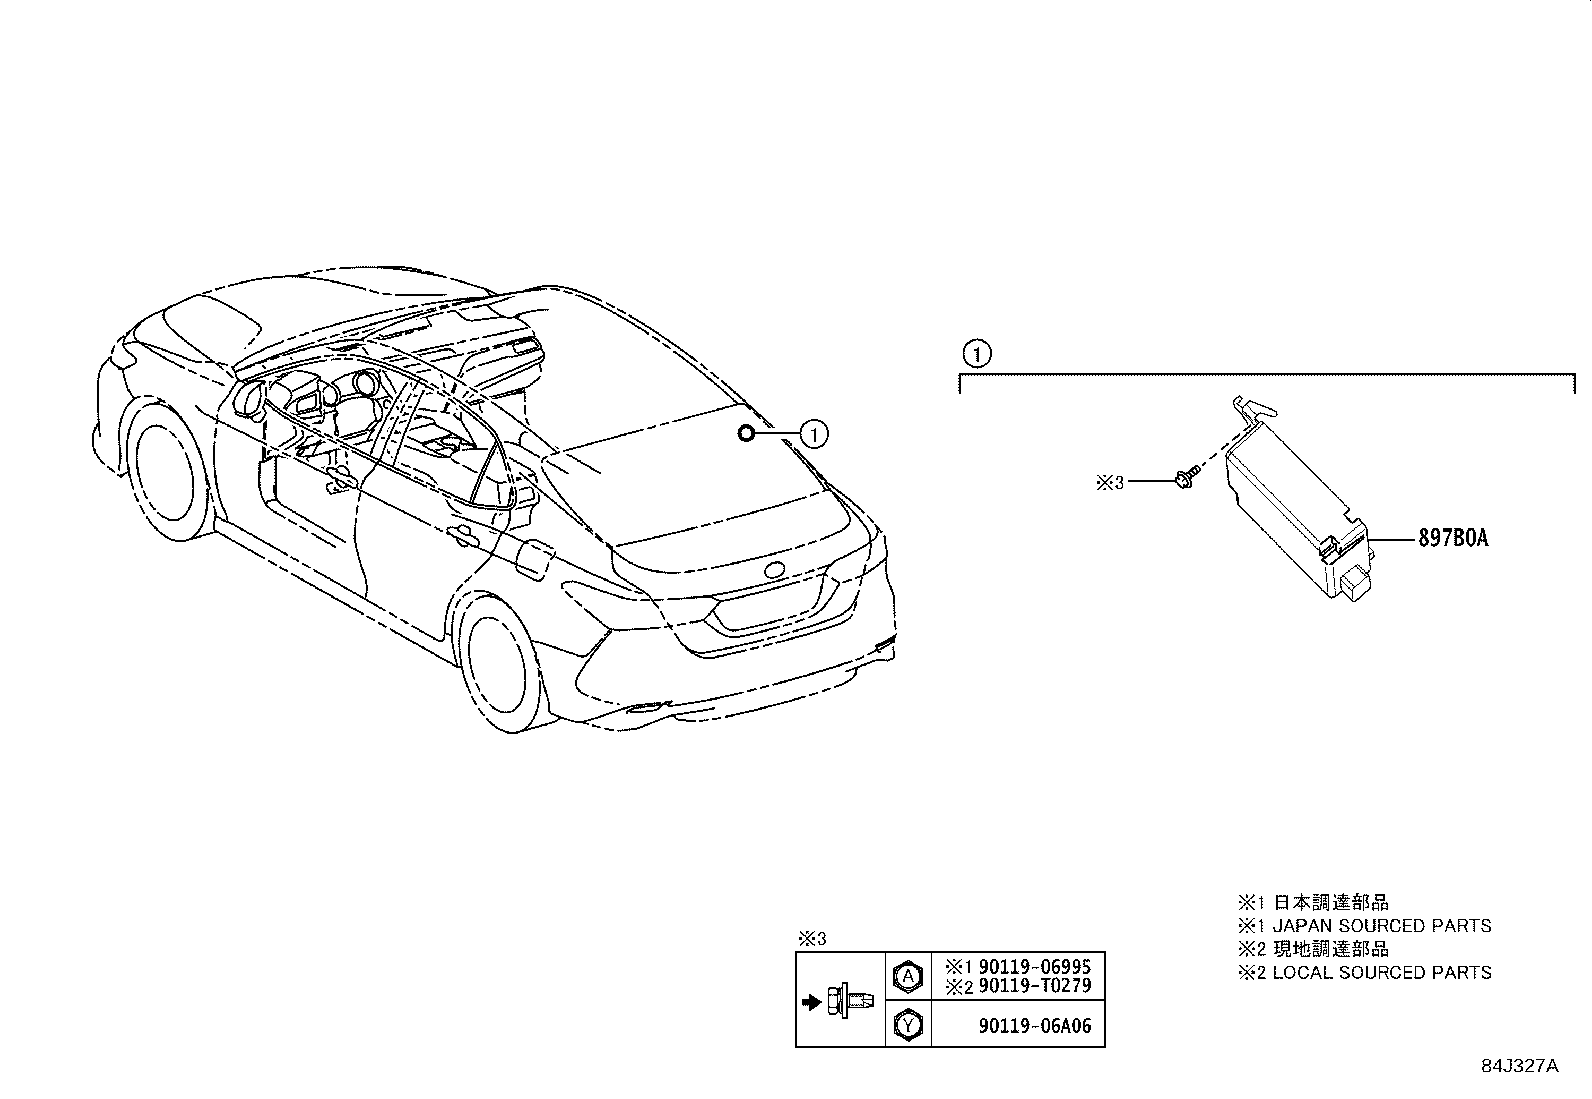 8435:TIRE PRESSURE WARNING SYSTEM CAMRY